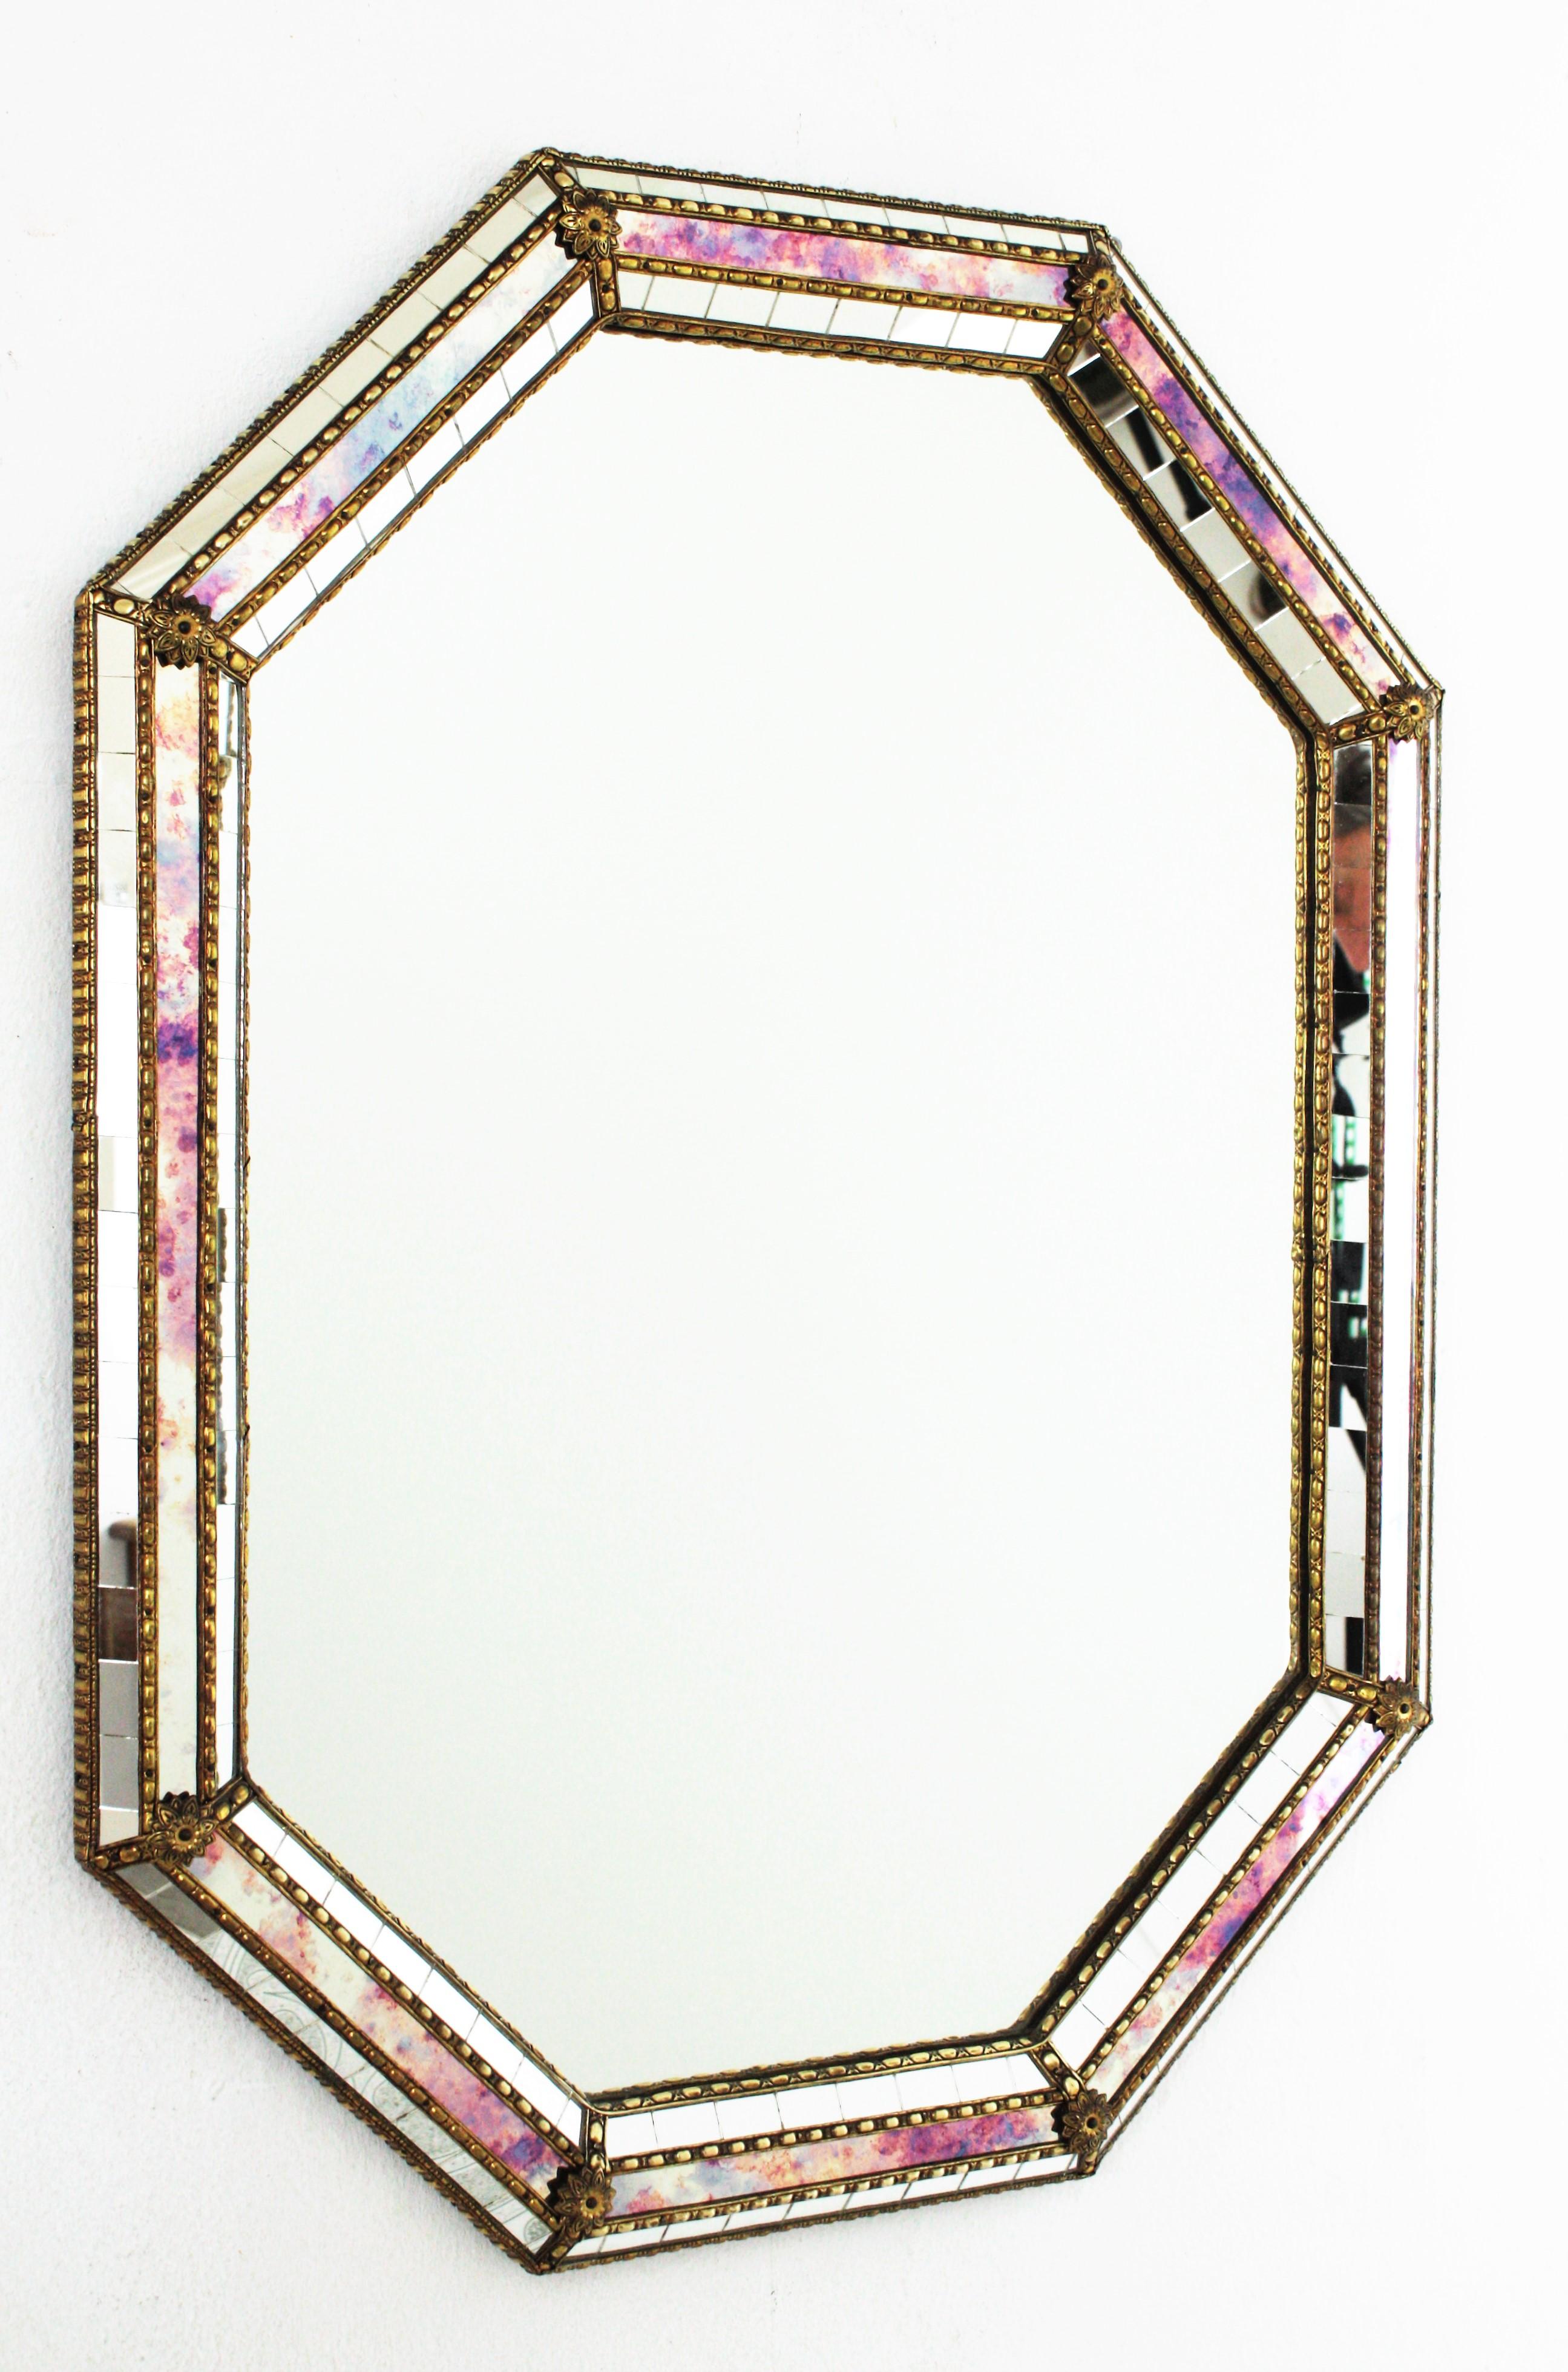 Beautiful Venetian style Hollywood Regency octagonal mirror with iridiscent and mirror glass panels. Spain, 1950s
This glamorous mirror featuring a triple layered mirror frame made of brass. Octagonal form with a beveled frame that has three layers